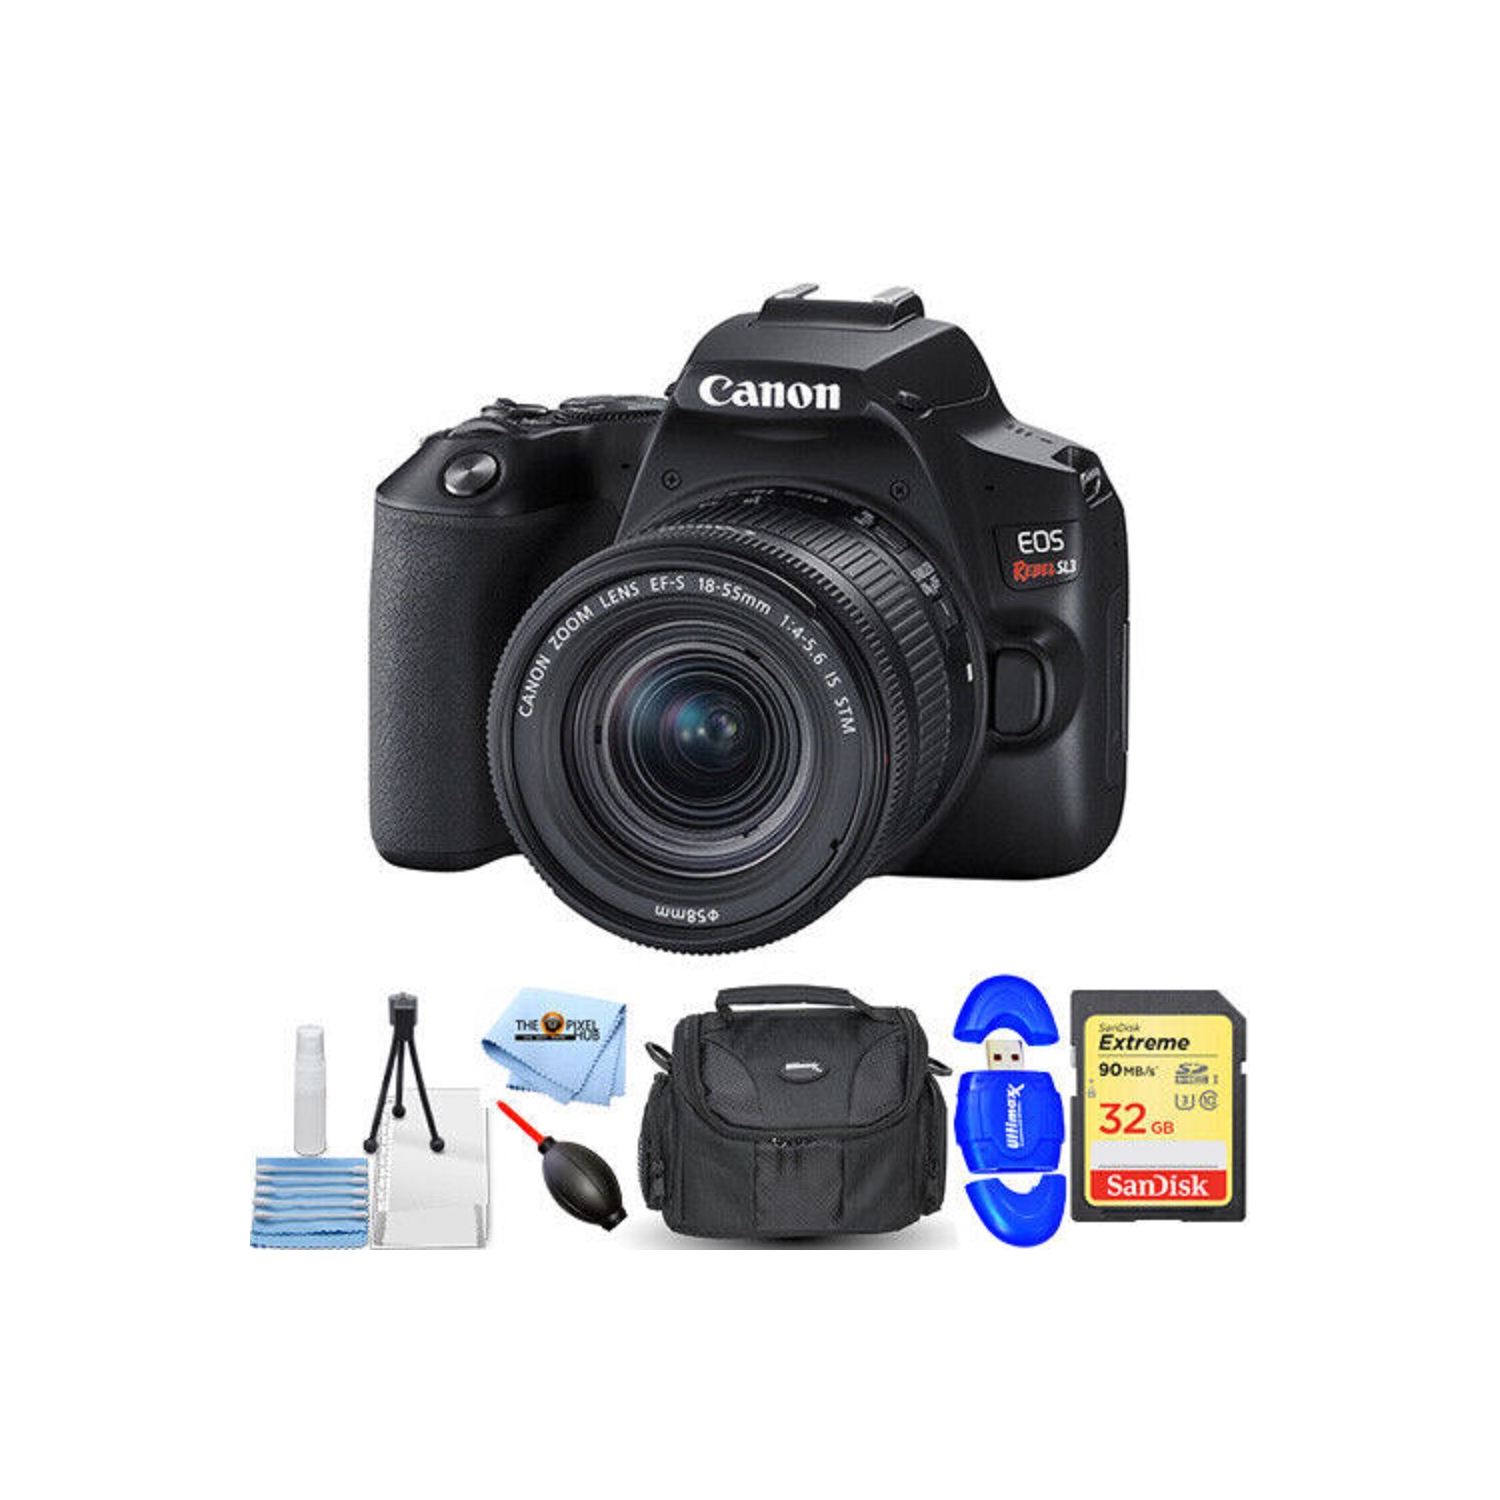 Canon EOS Rebel SL3 Camera with 18-55mm IS STM Lens (Black) - 7PC Accessory Kit